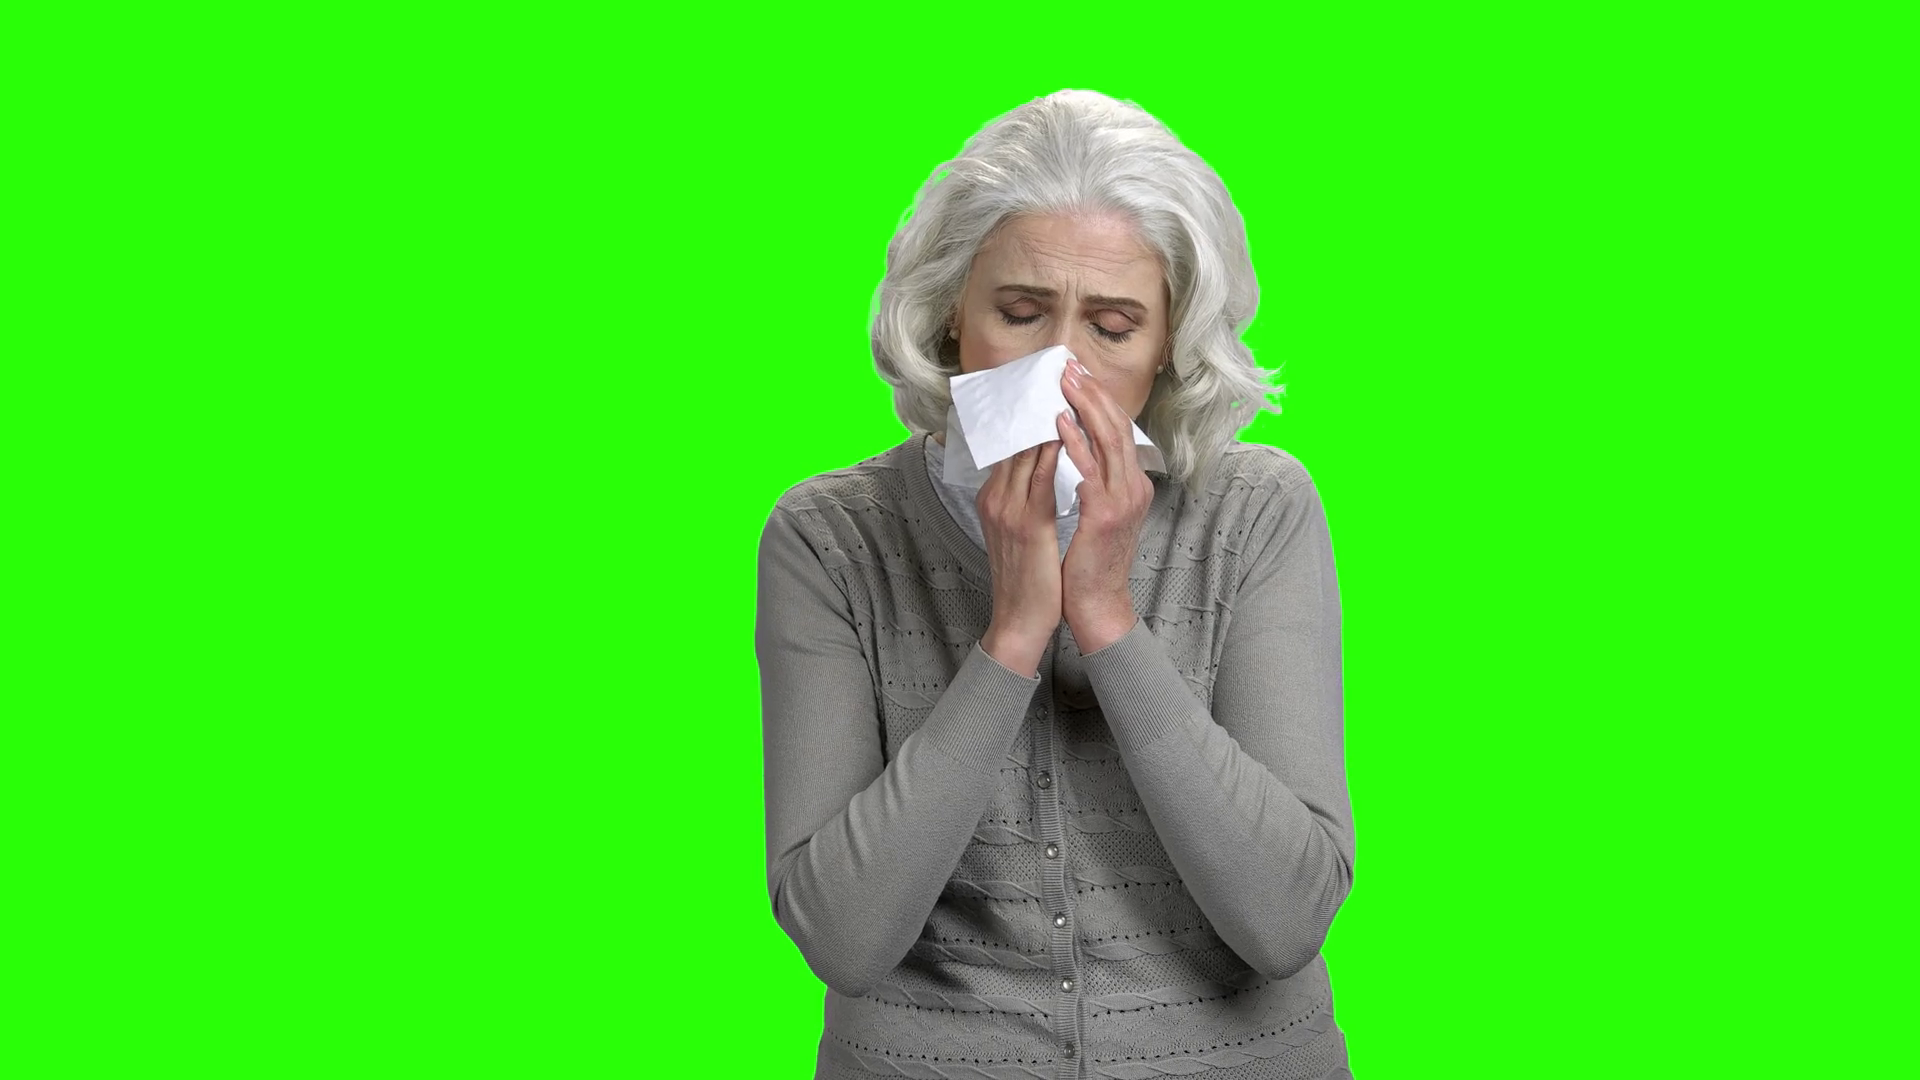 Sneezing caucasian woman on green screen. Sick elderly woman sneezing into paper tissue. Chroma key background for keying. Stock Video Footage